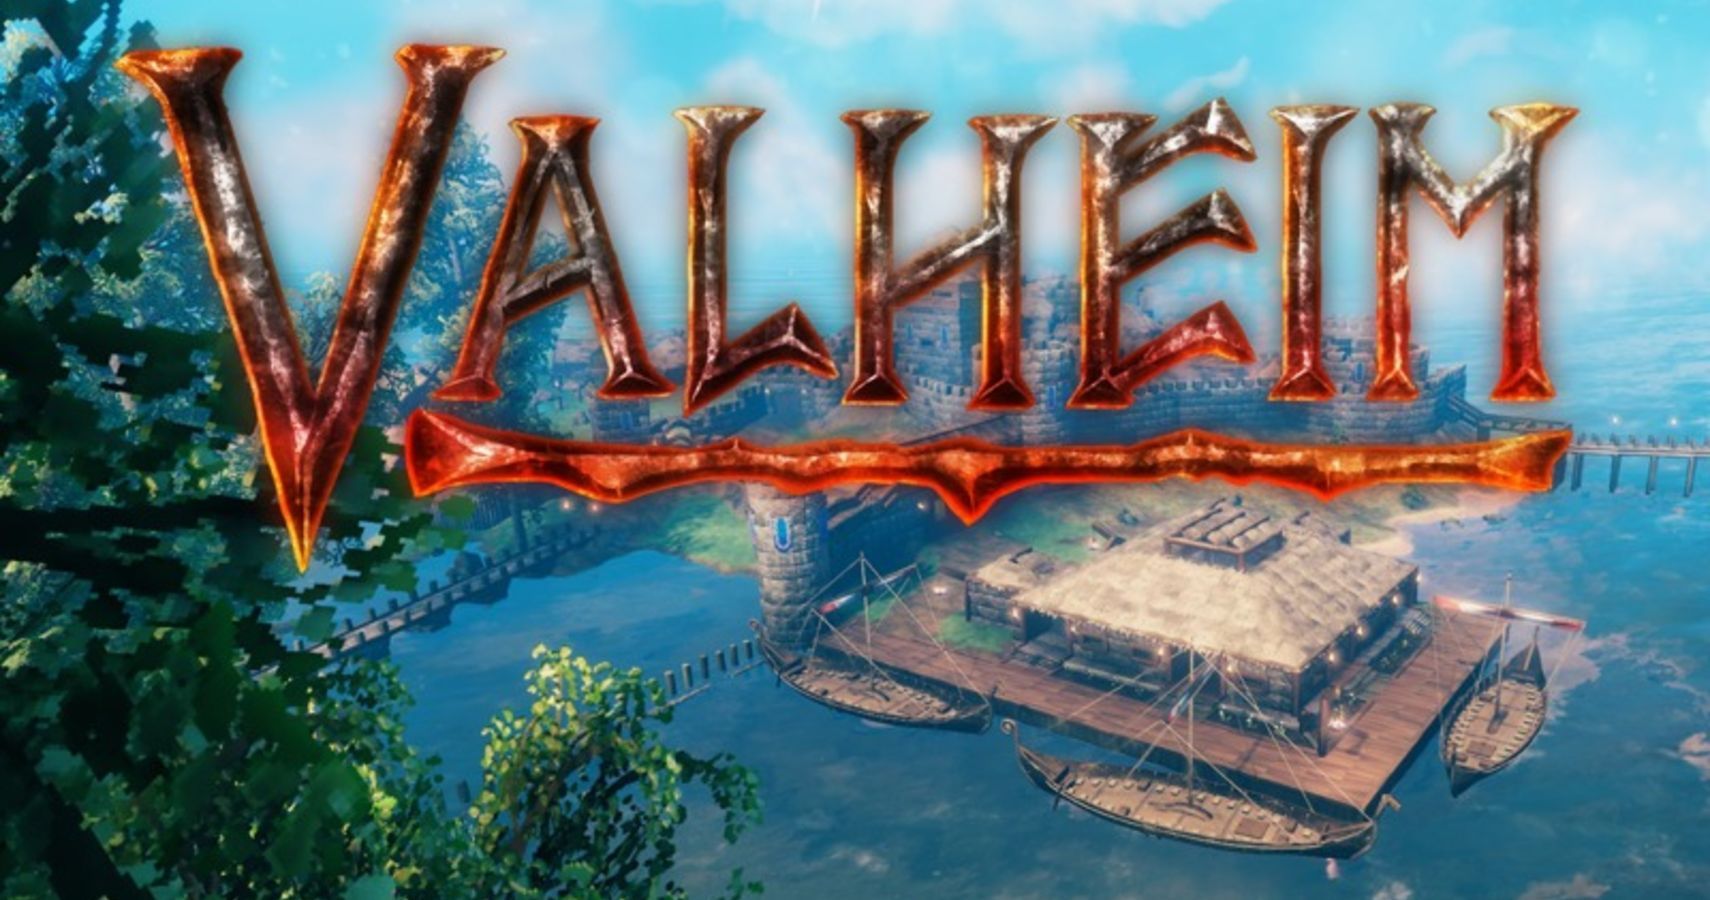 Valheim Passes One Million Sales In Its First Week Of Steam Early Access